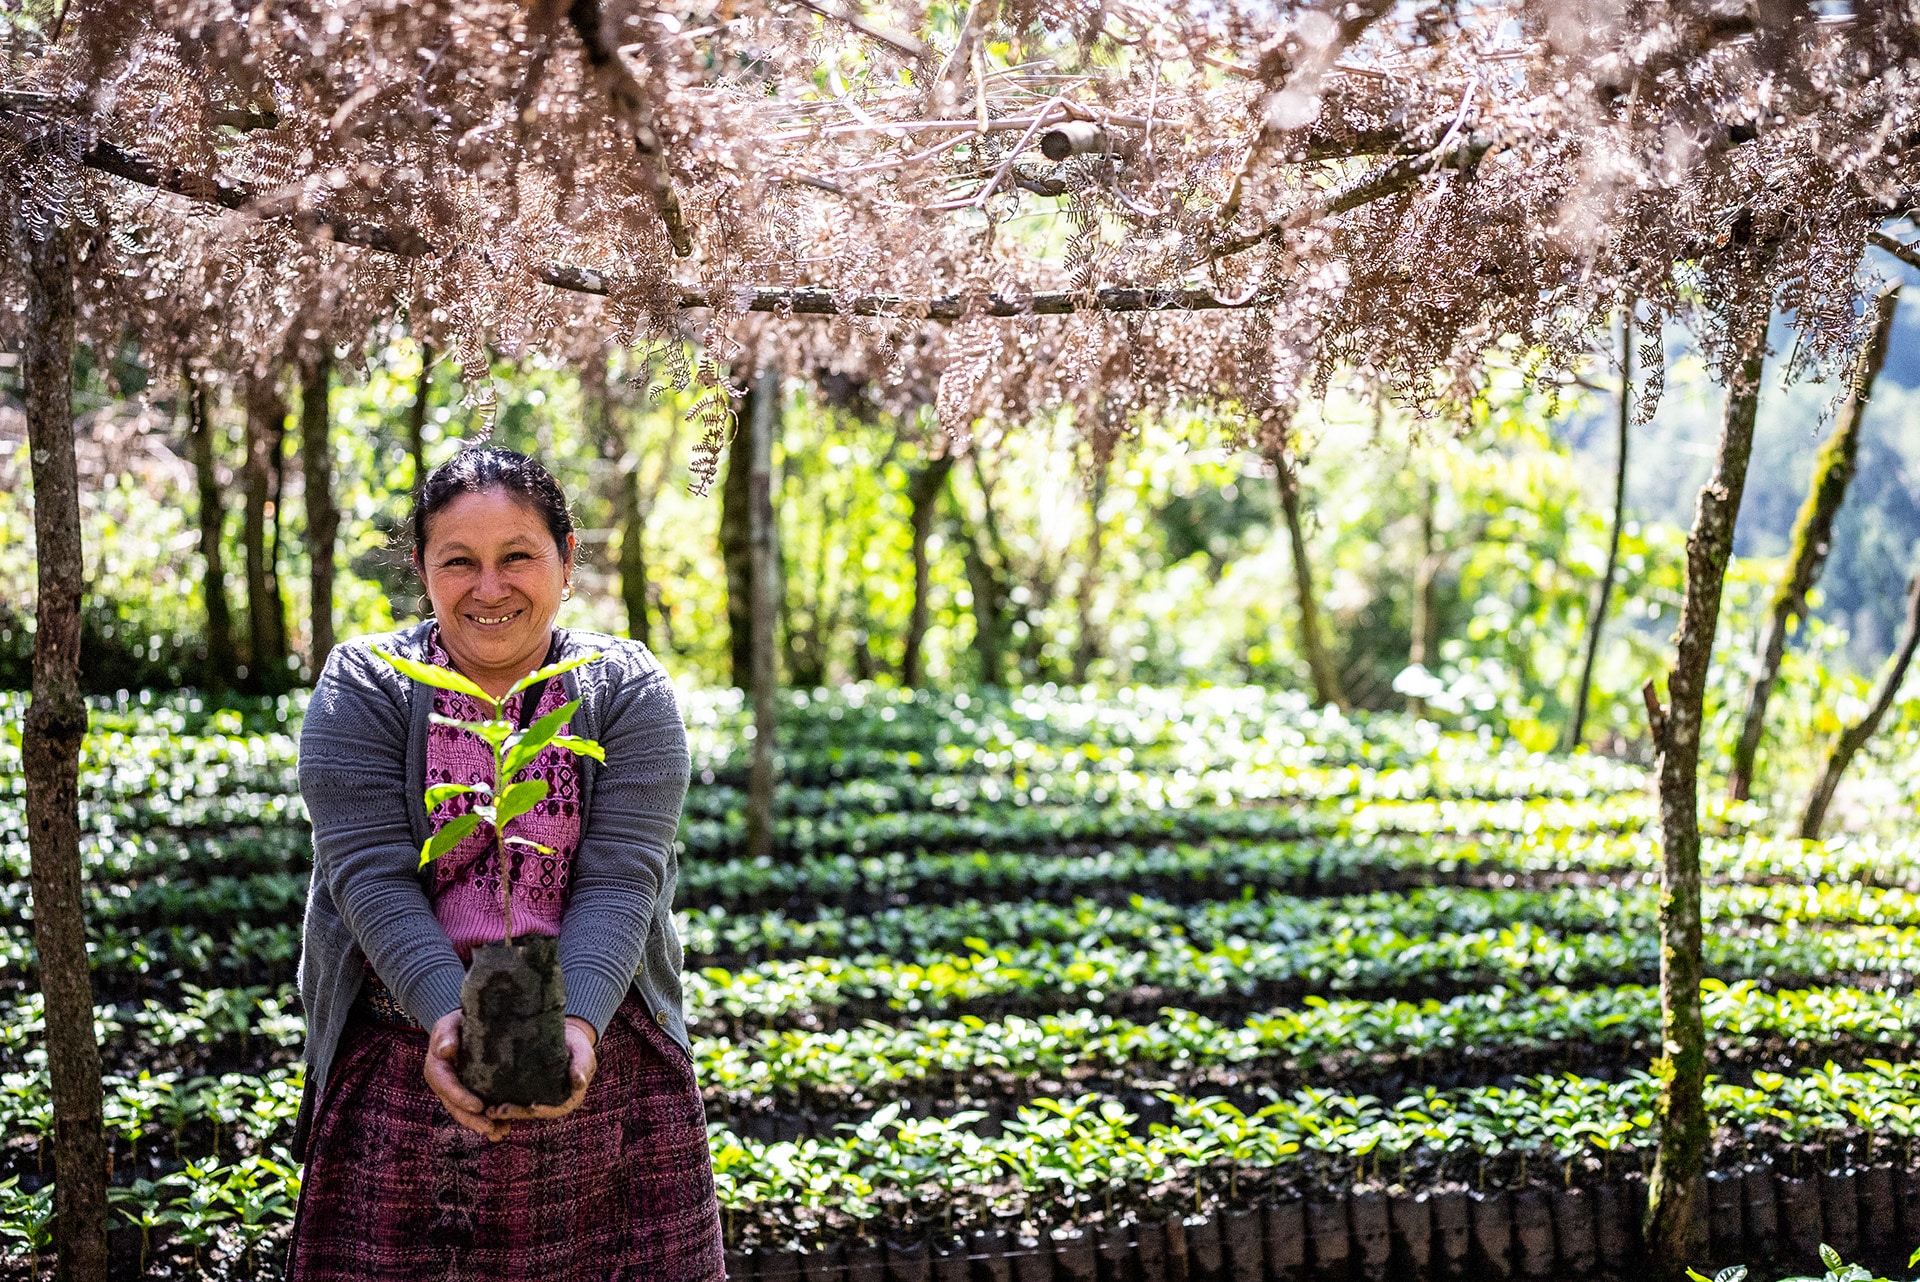  producer proudly displays her growing crops in Barillas, Guatemala.